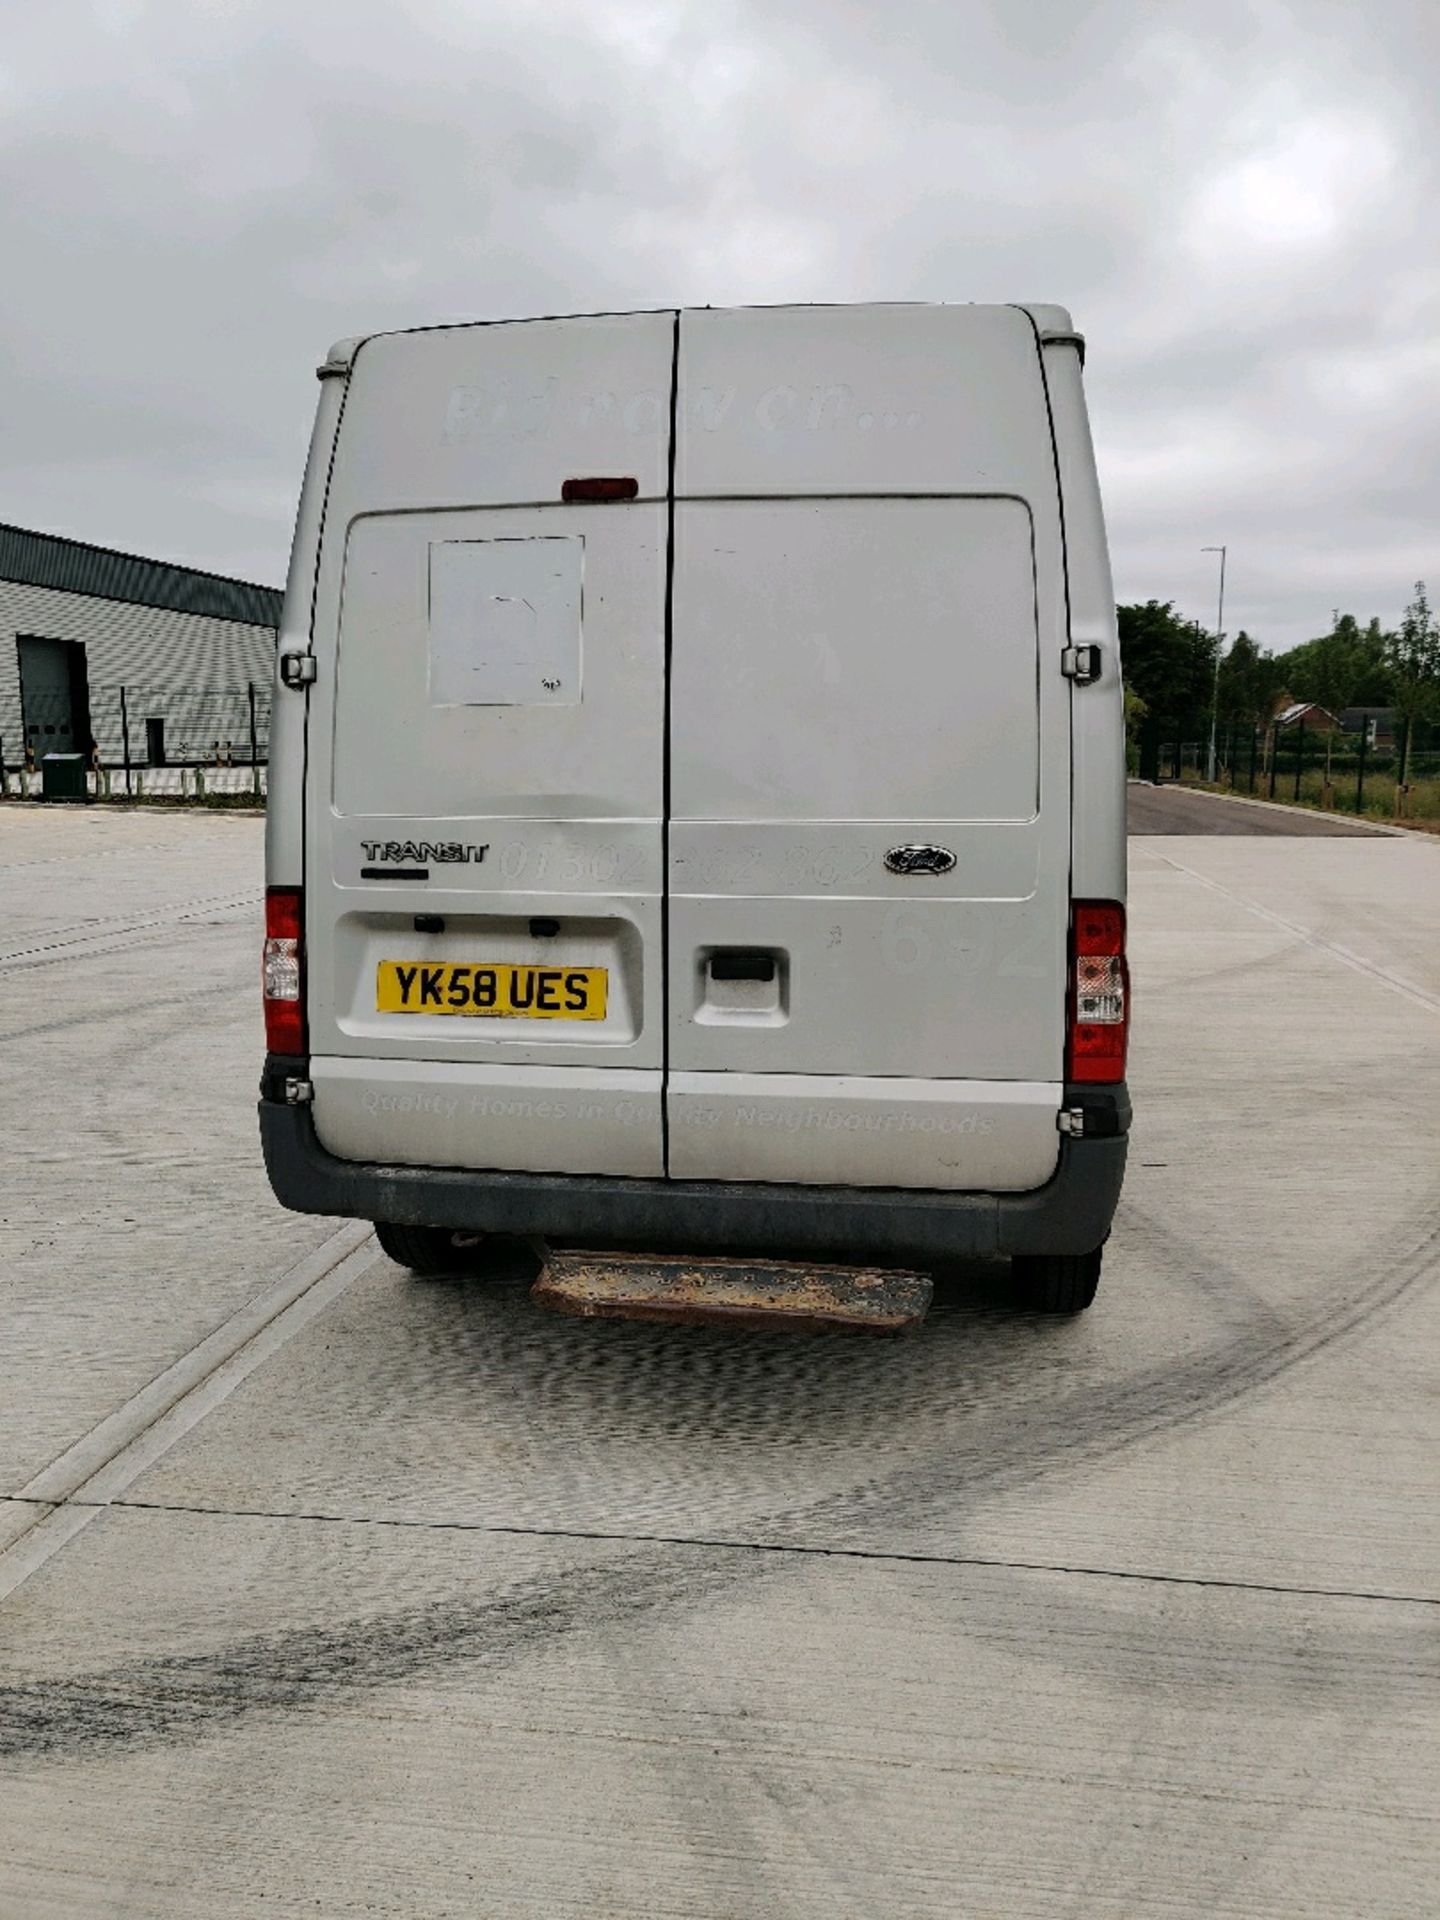 ENTRY DIRECT FROM LOCAL AUTHORITY FORD Transit 110 T350L FWD - Image 3 of 12